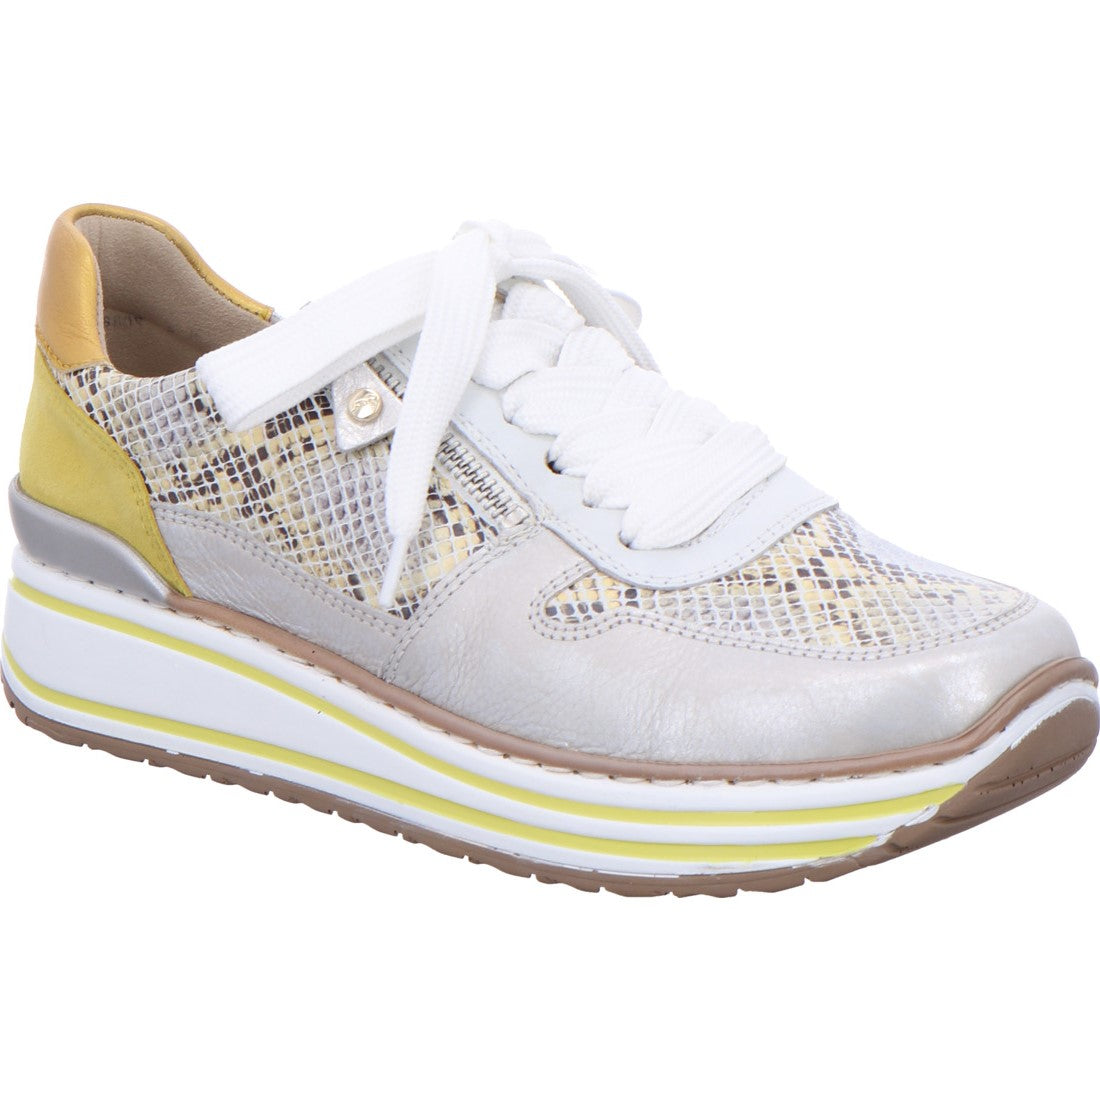 Ara ladies Sapporo Double Sole Lace Up Sneaker White Gold